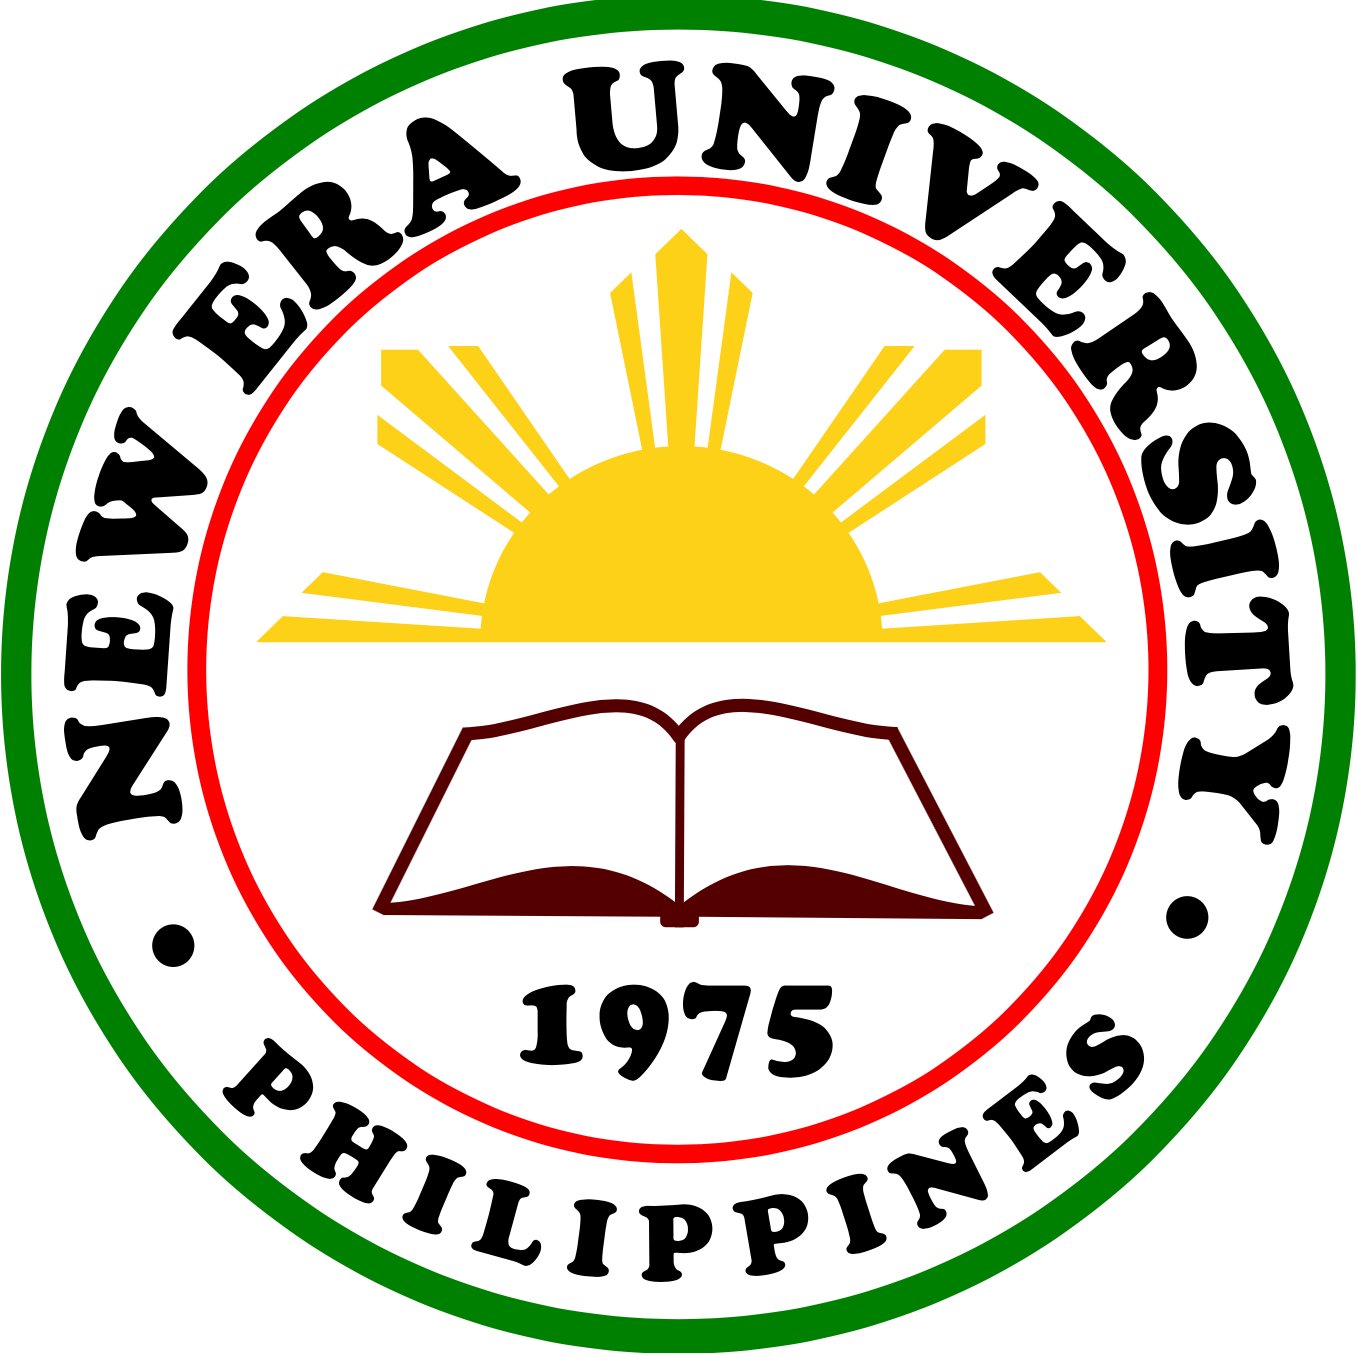 This is the Official Twitter Account of the New Era University (NEU).